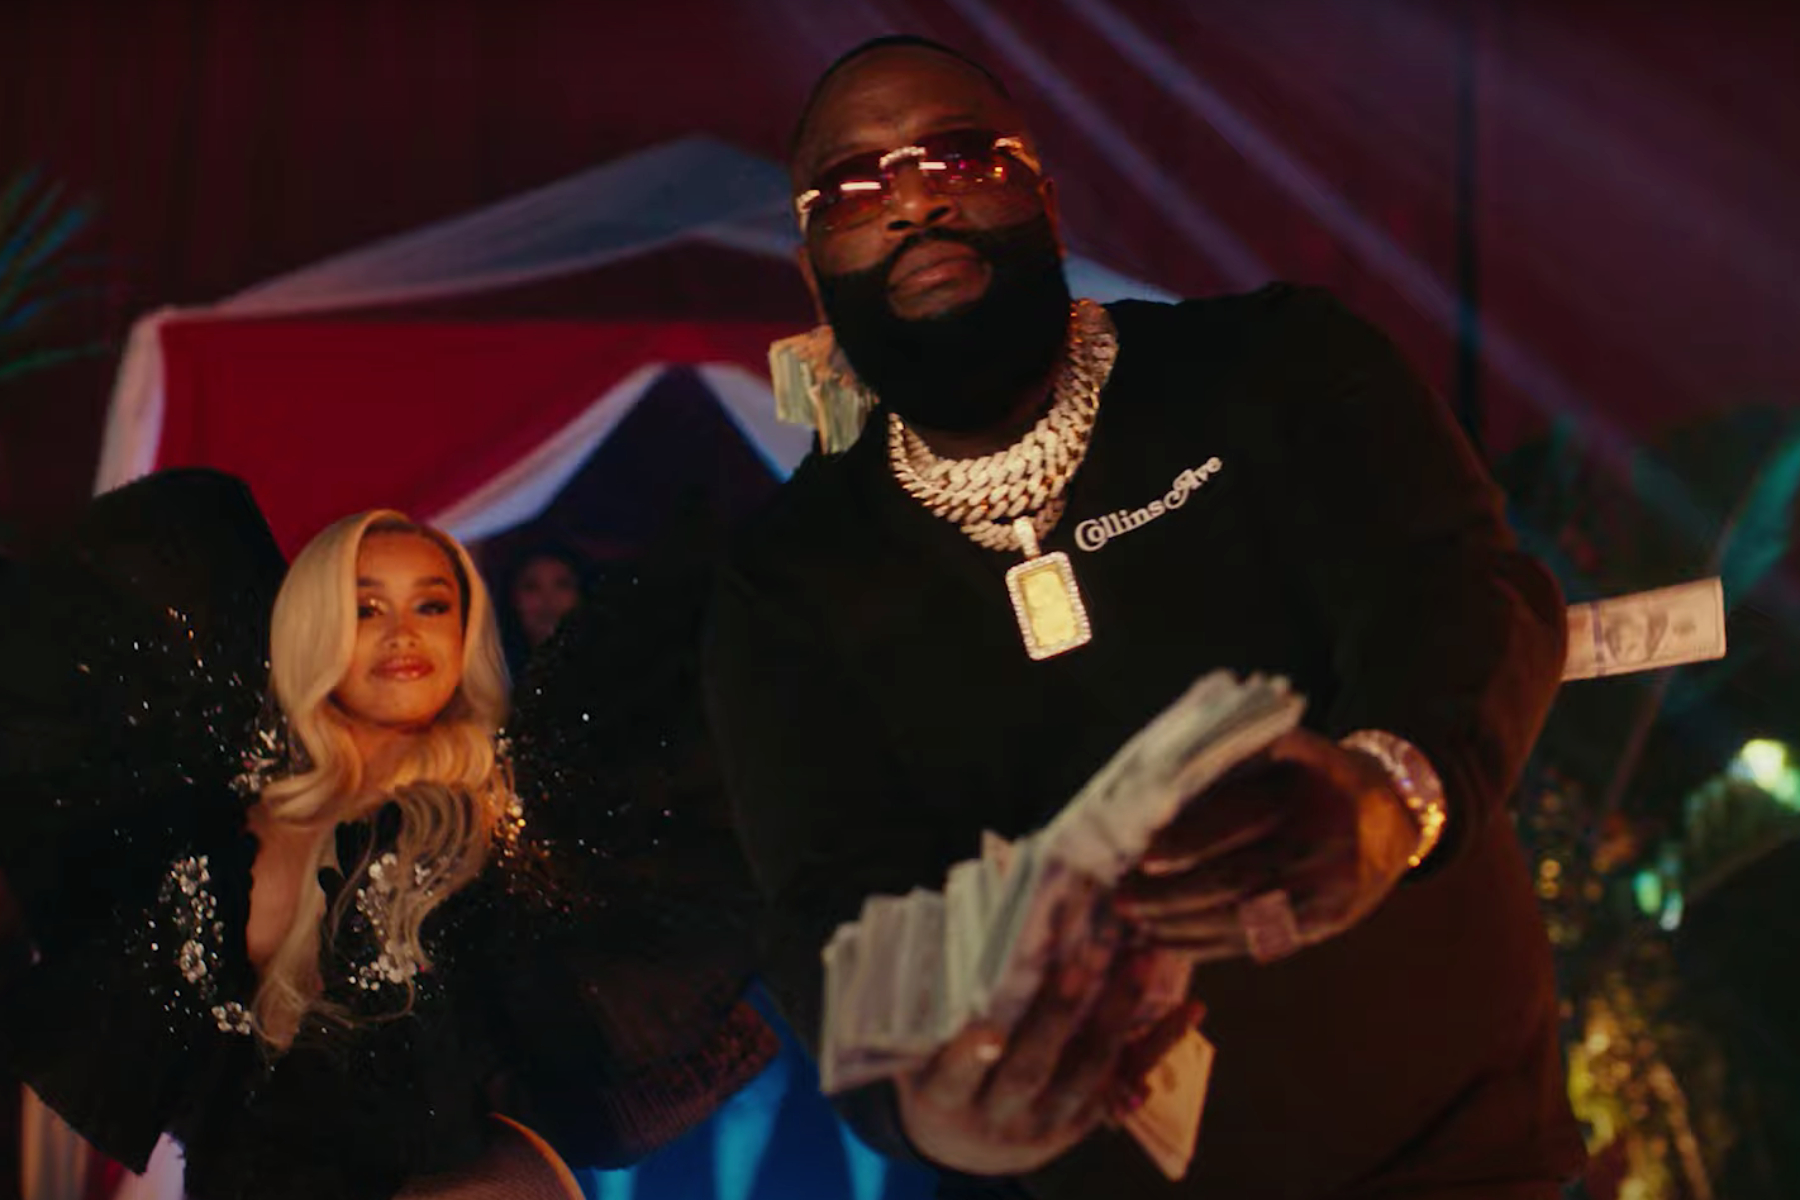 Rick Ross - Wiggle (Official Music Video) ft. DreamDoll